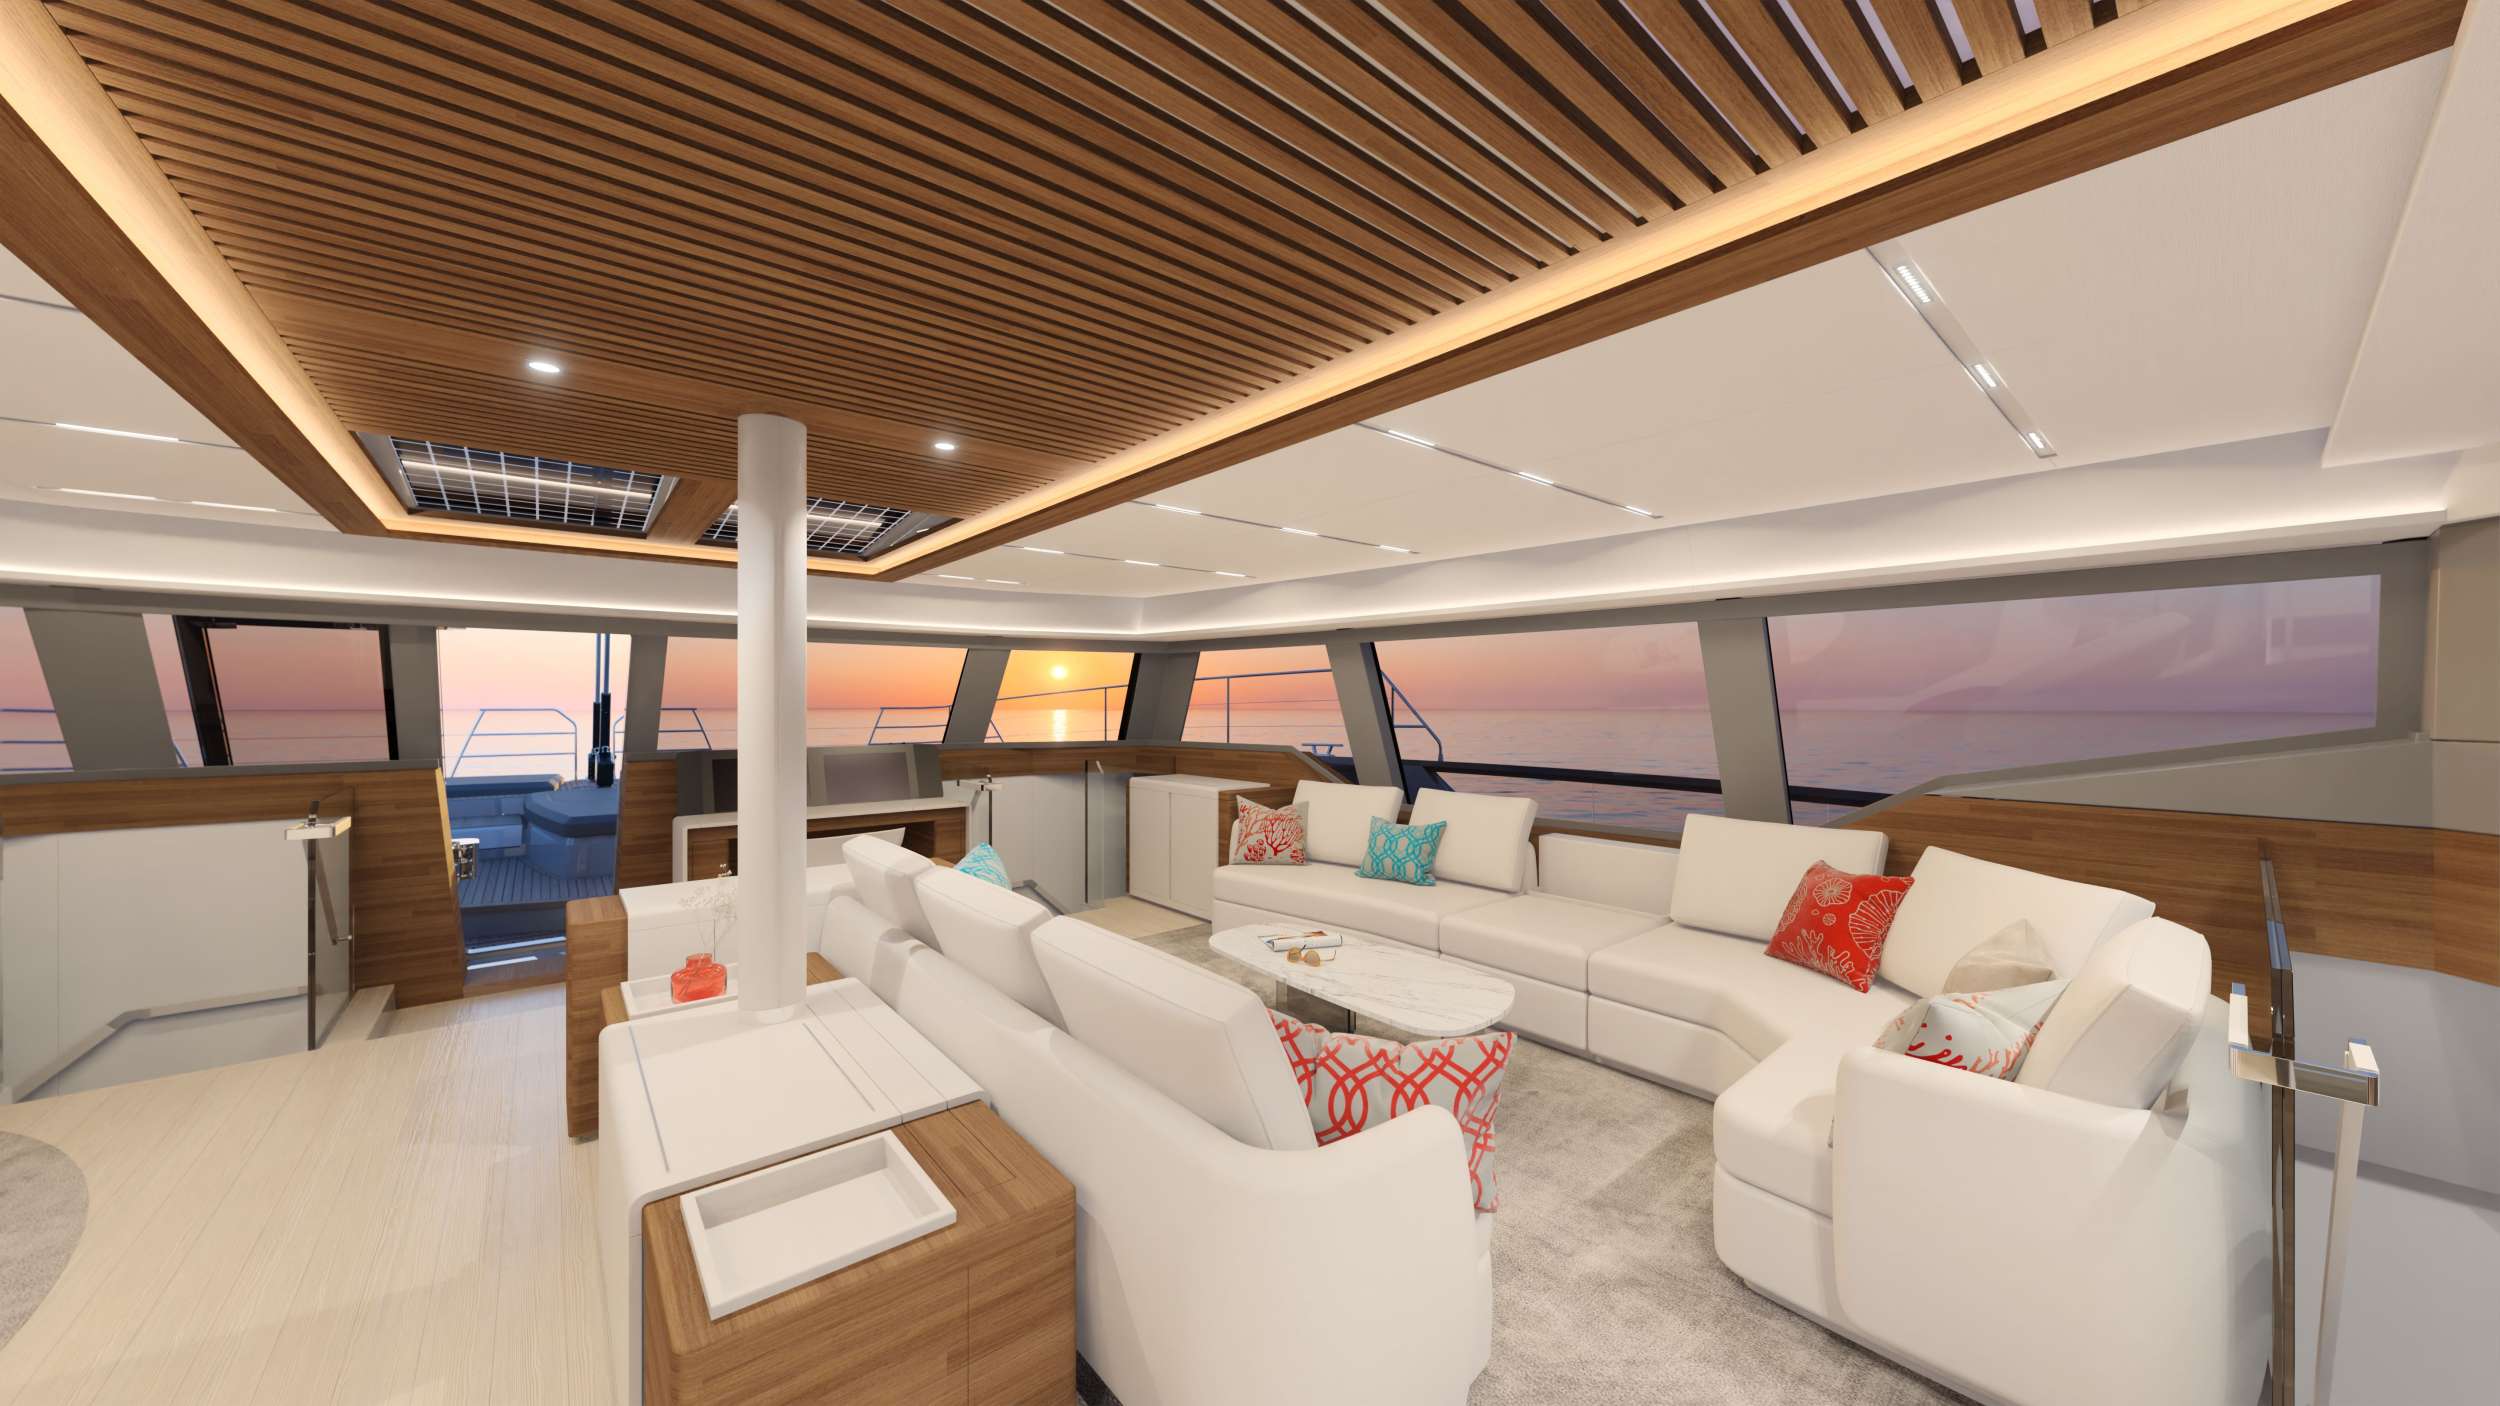 AD ASTRA Yacht Charter - Artist renderings / Main saloon